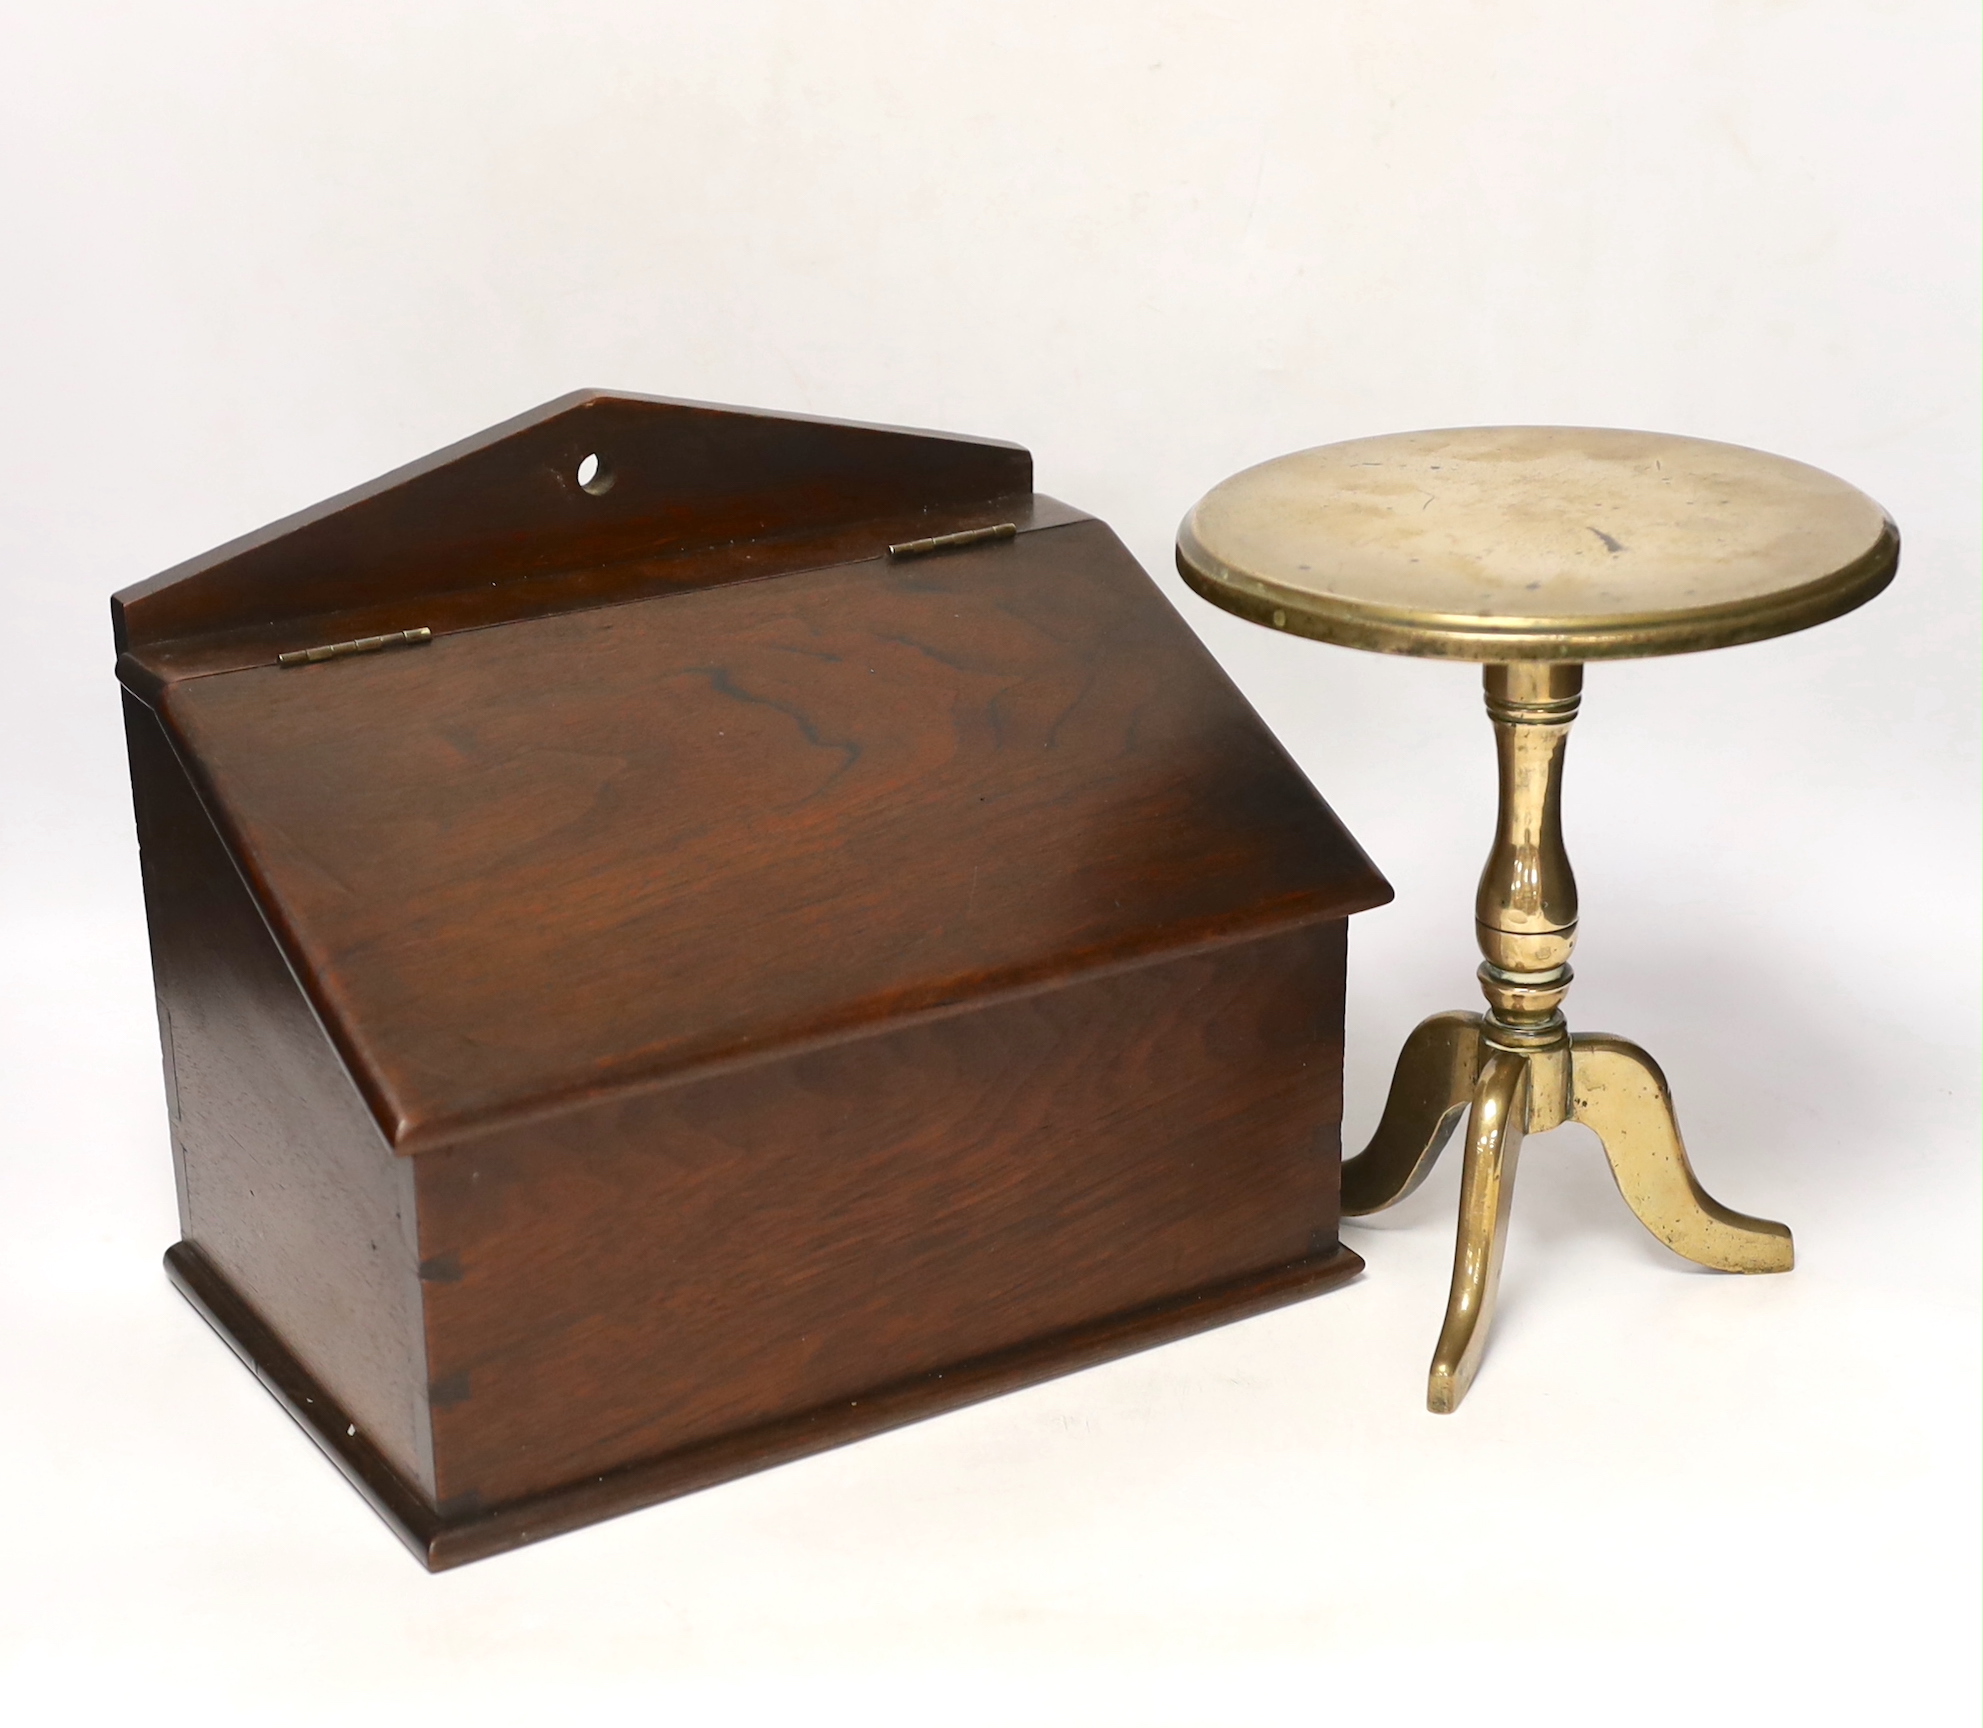 A Georgian brass trivet and a 19th century candle box, largest 27cm wide